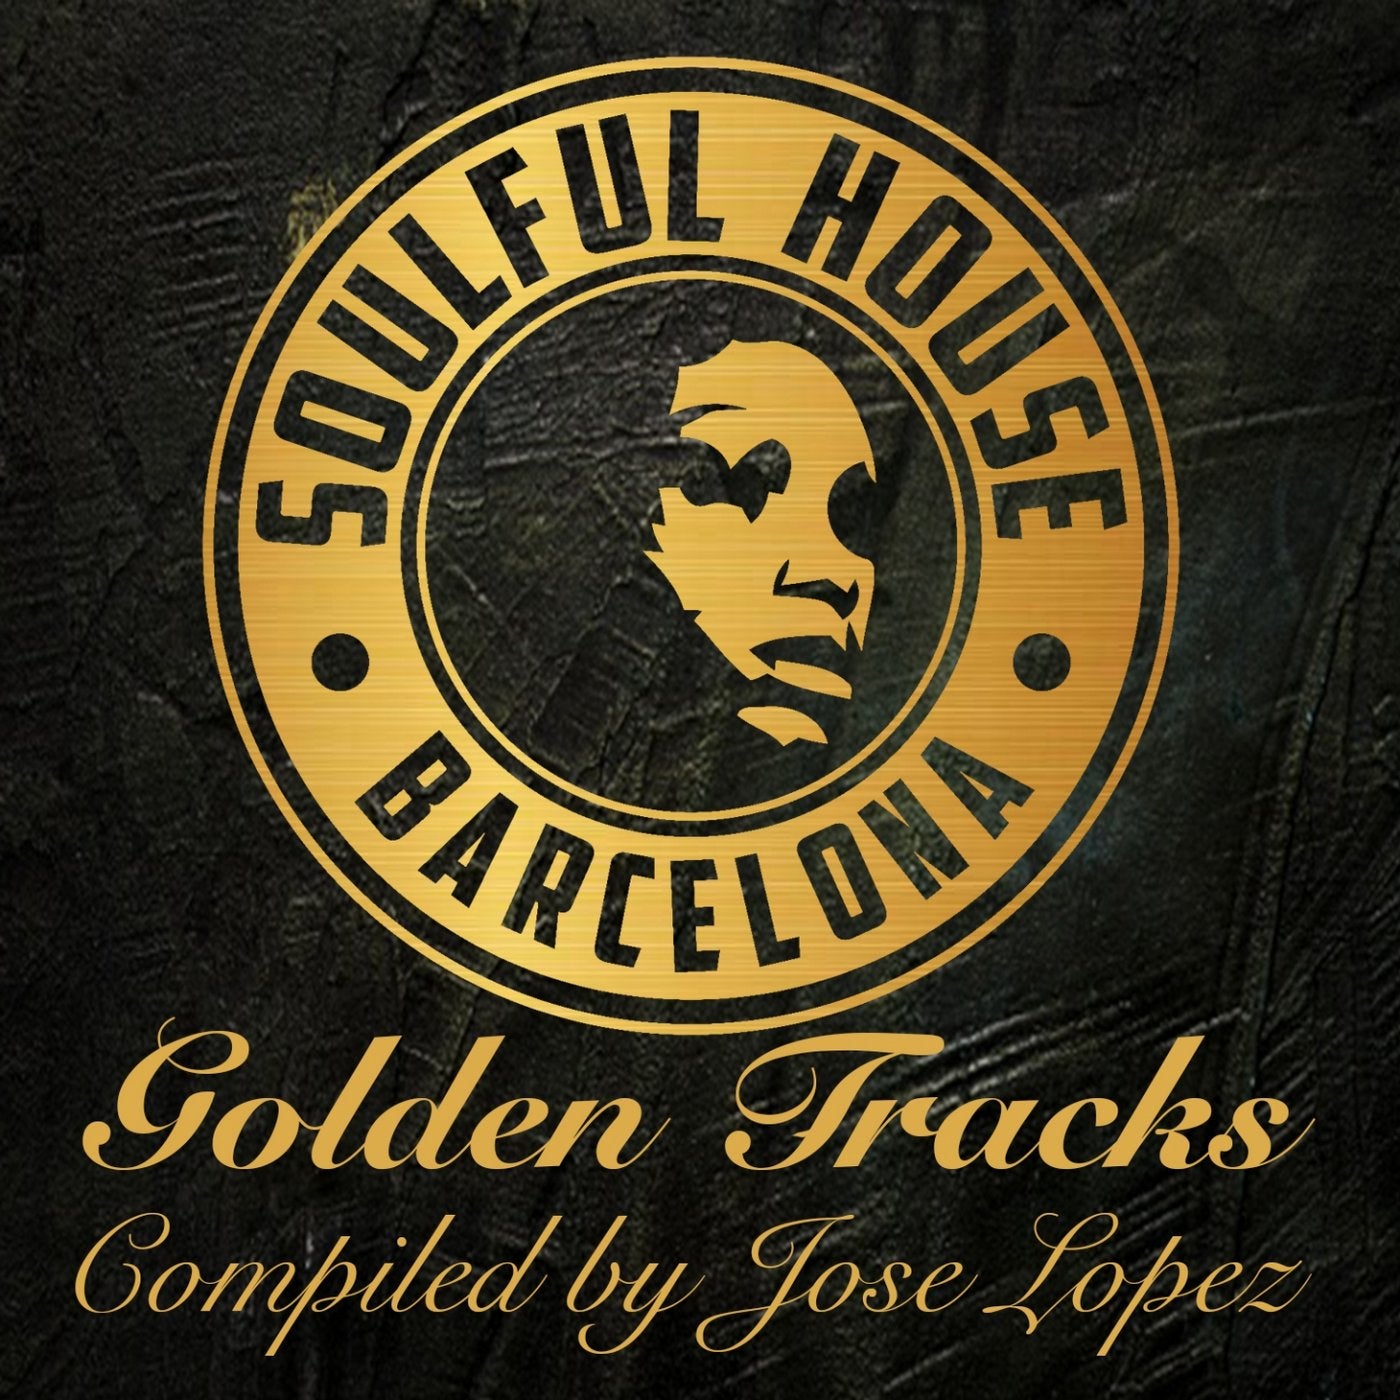 Soulful House Barcelona (Golden Tracks Compiled by Jose Lopez)